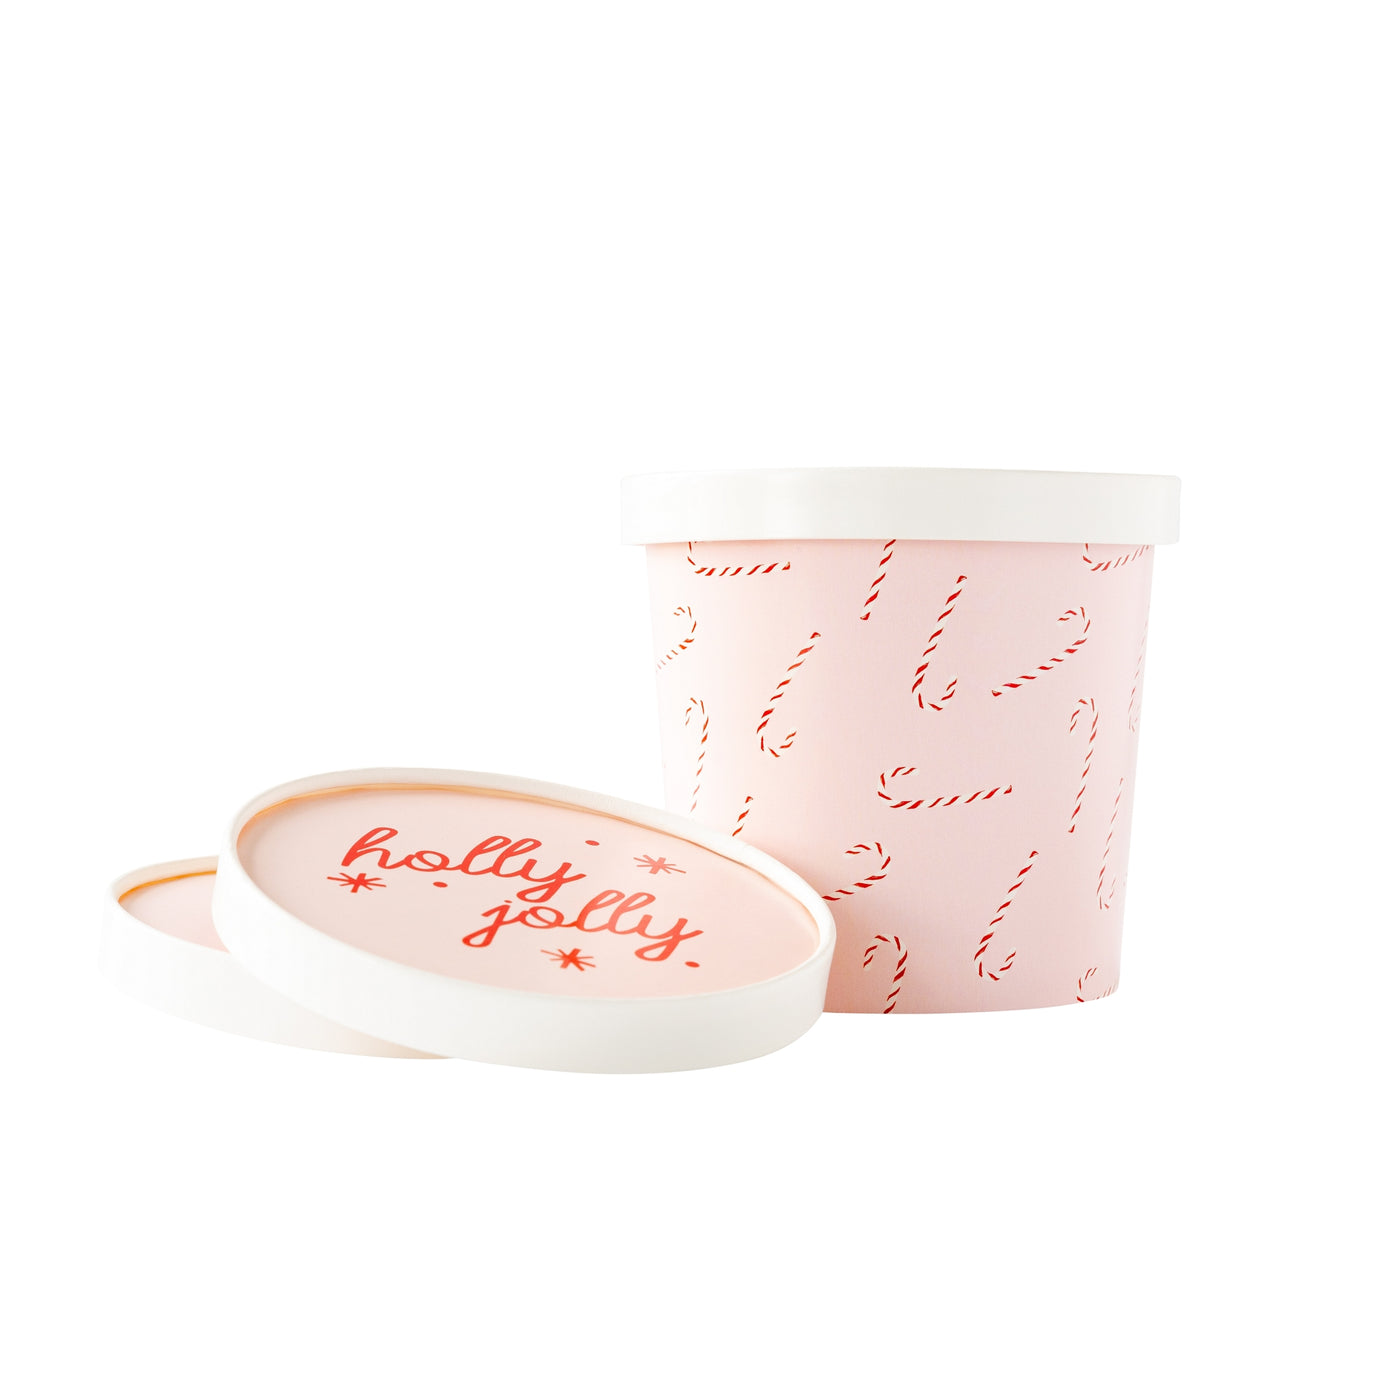 WHM1017 - Whimsy Santa Scattered Candy Cane Treat Cup